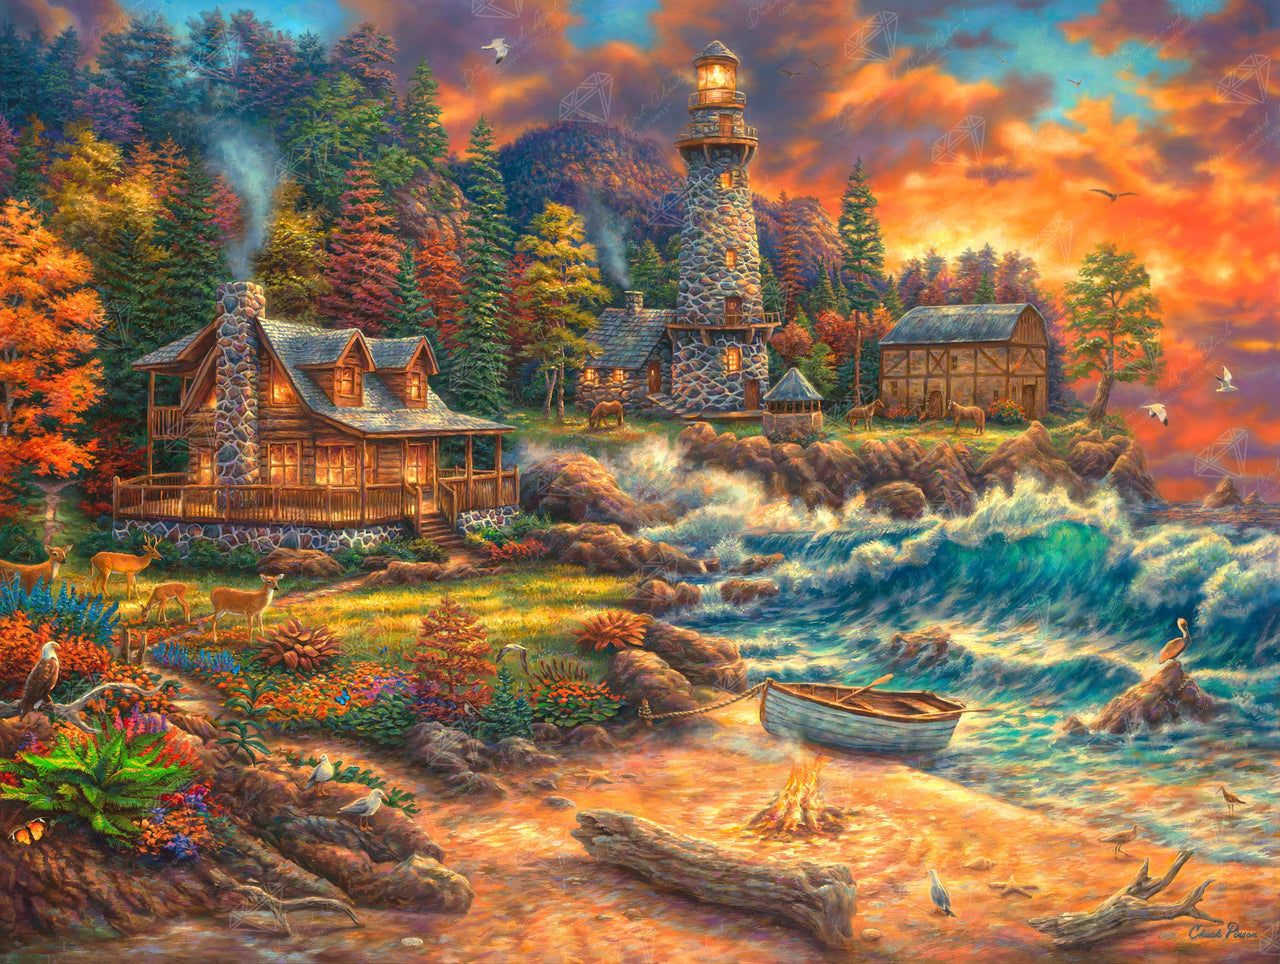 Diamond Painting Providence by the Sea 36.6" x 27.6" (93cm x 70cm) / Square With 65 Colors Including 3 ABs and 2 Fairy Dust Diamonds / 104,813